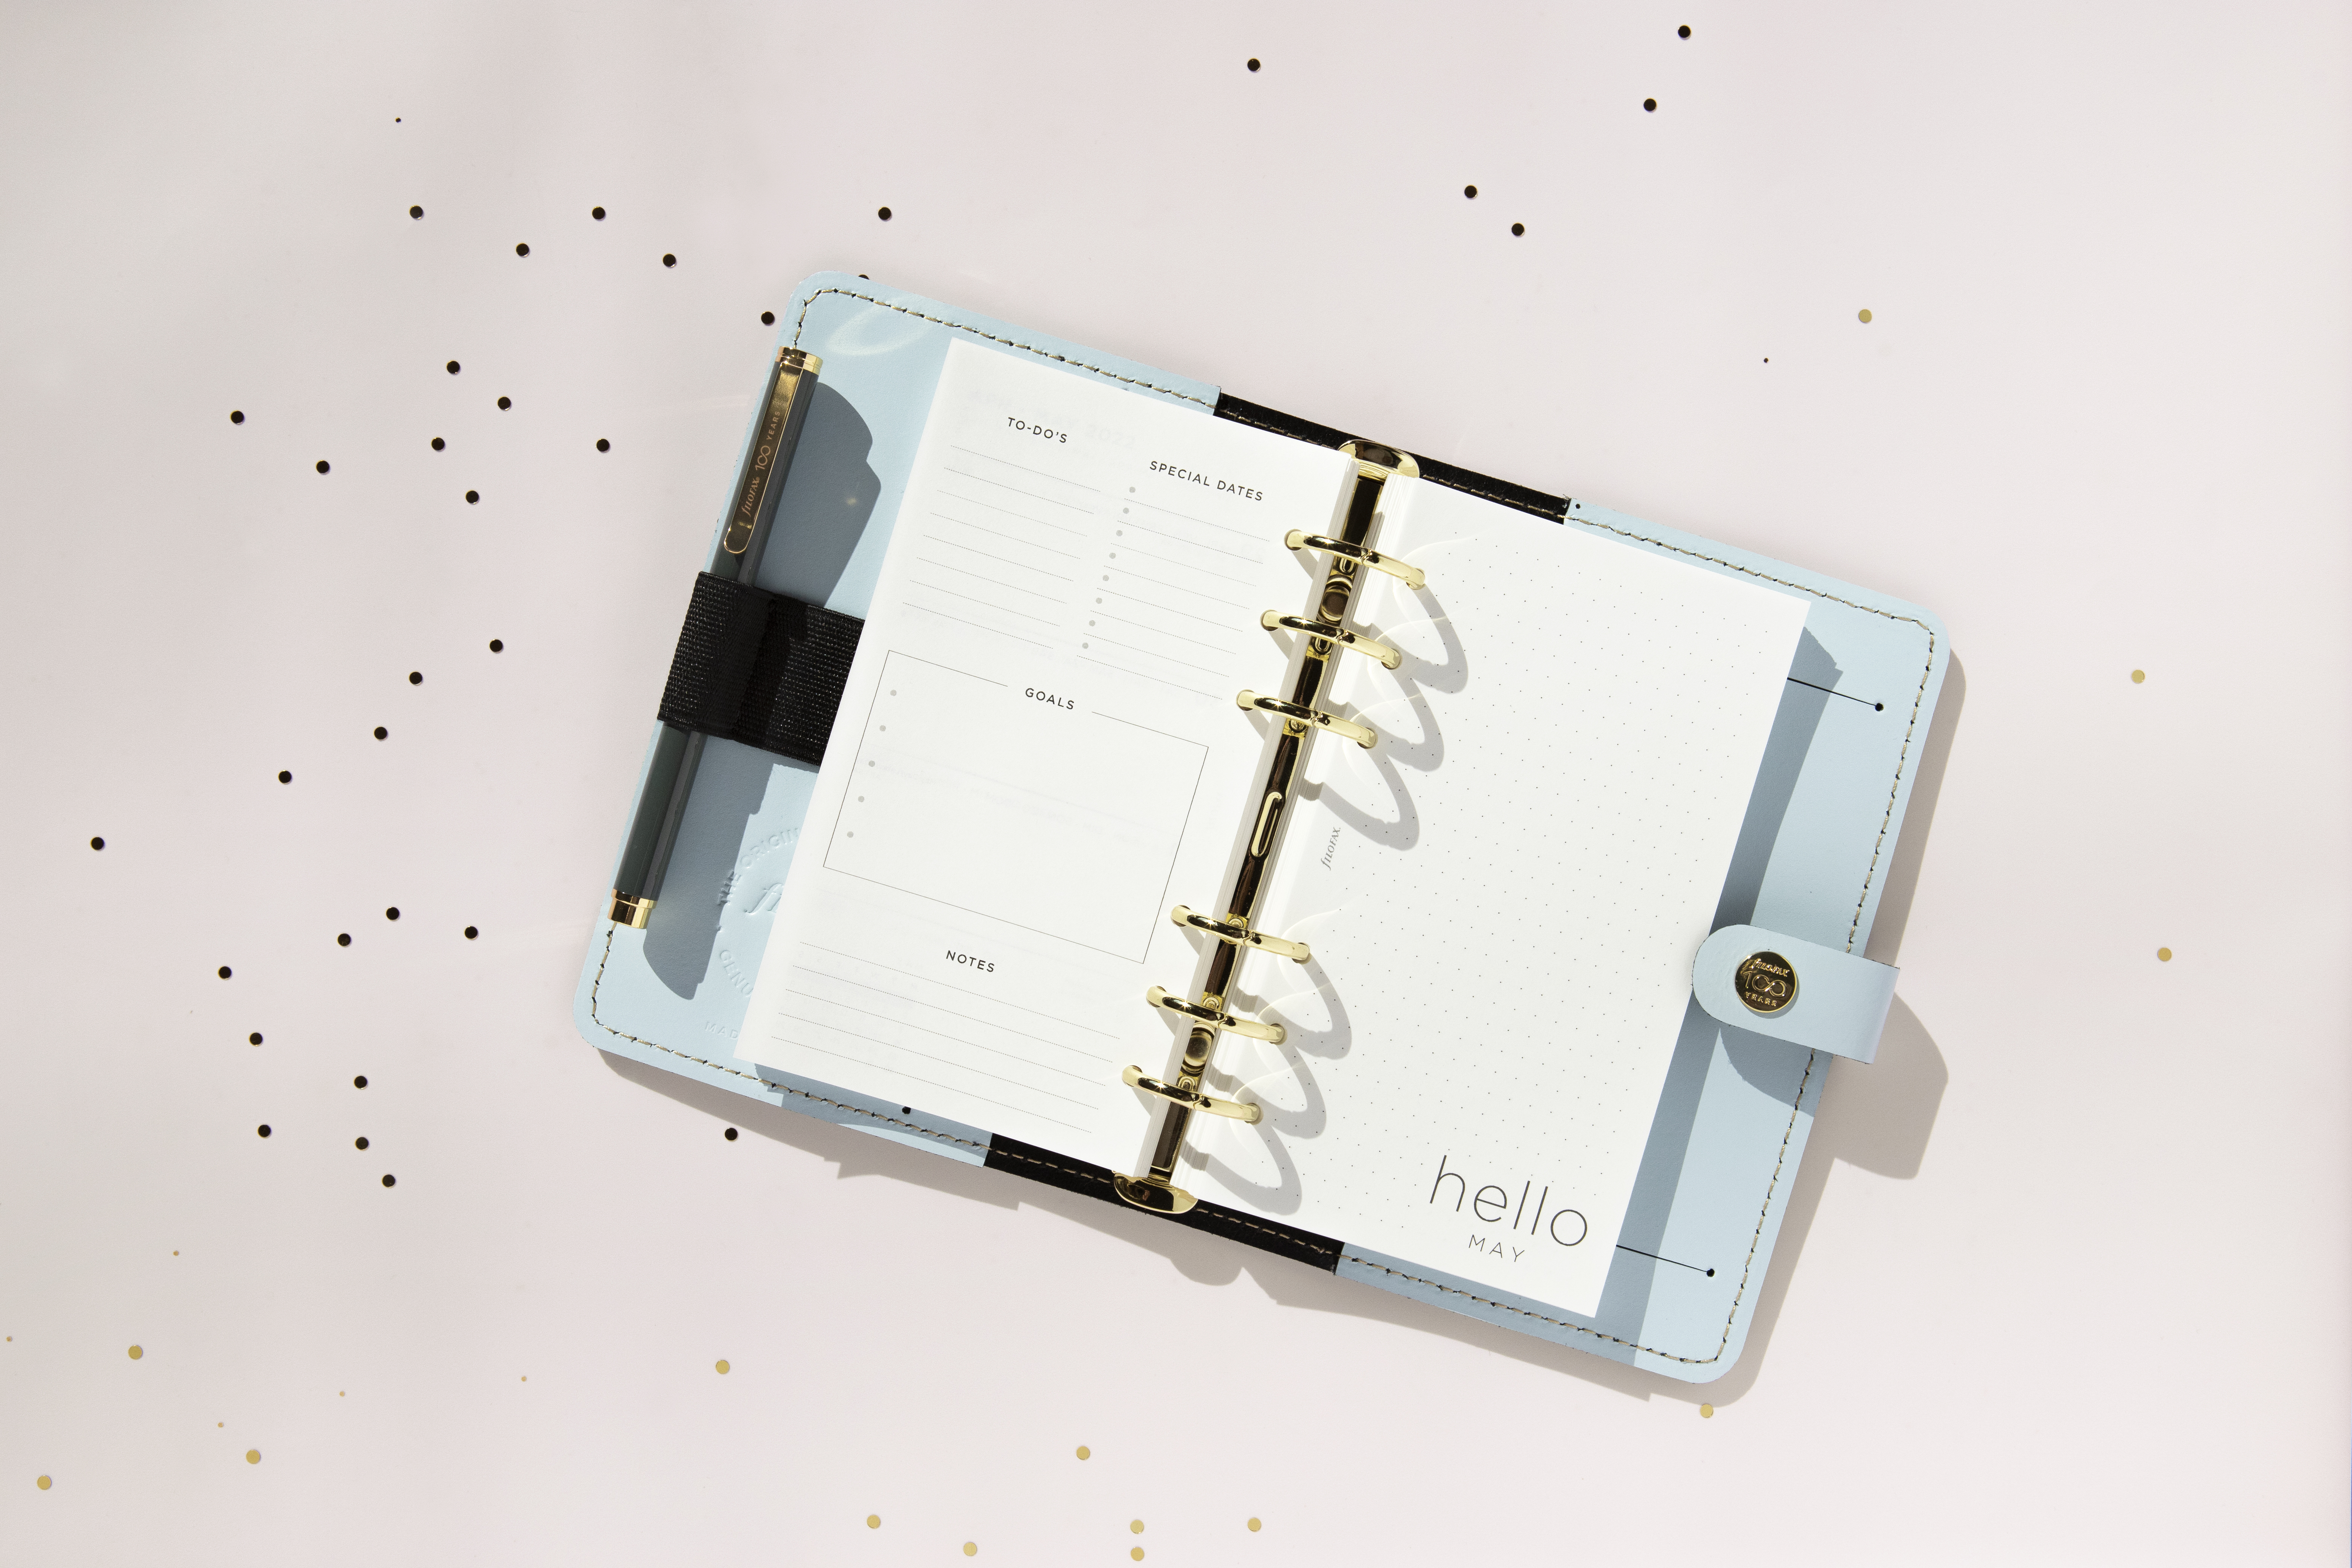 Filofax Centennial Collection Organiser 2022 Refill - The Original Organiser Personal Sky _SKU 029603_ - Double Page Spread view_Lifestyle image1